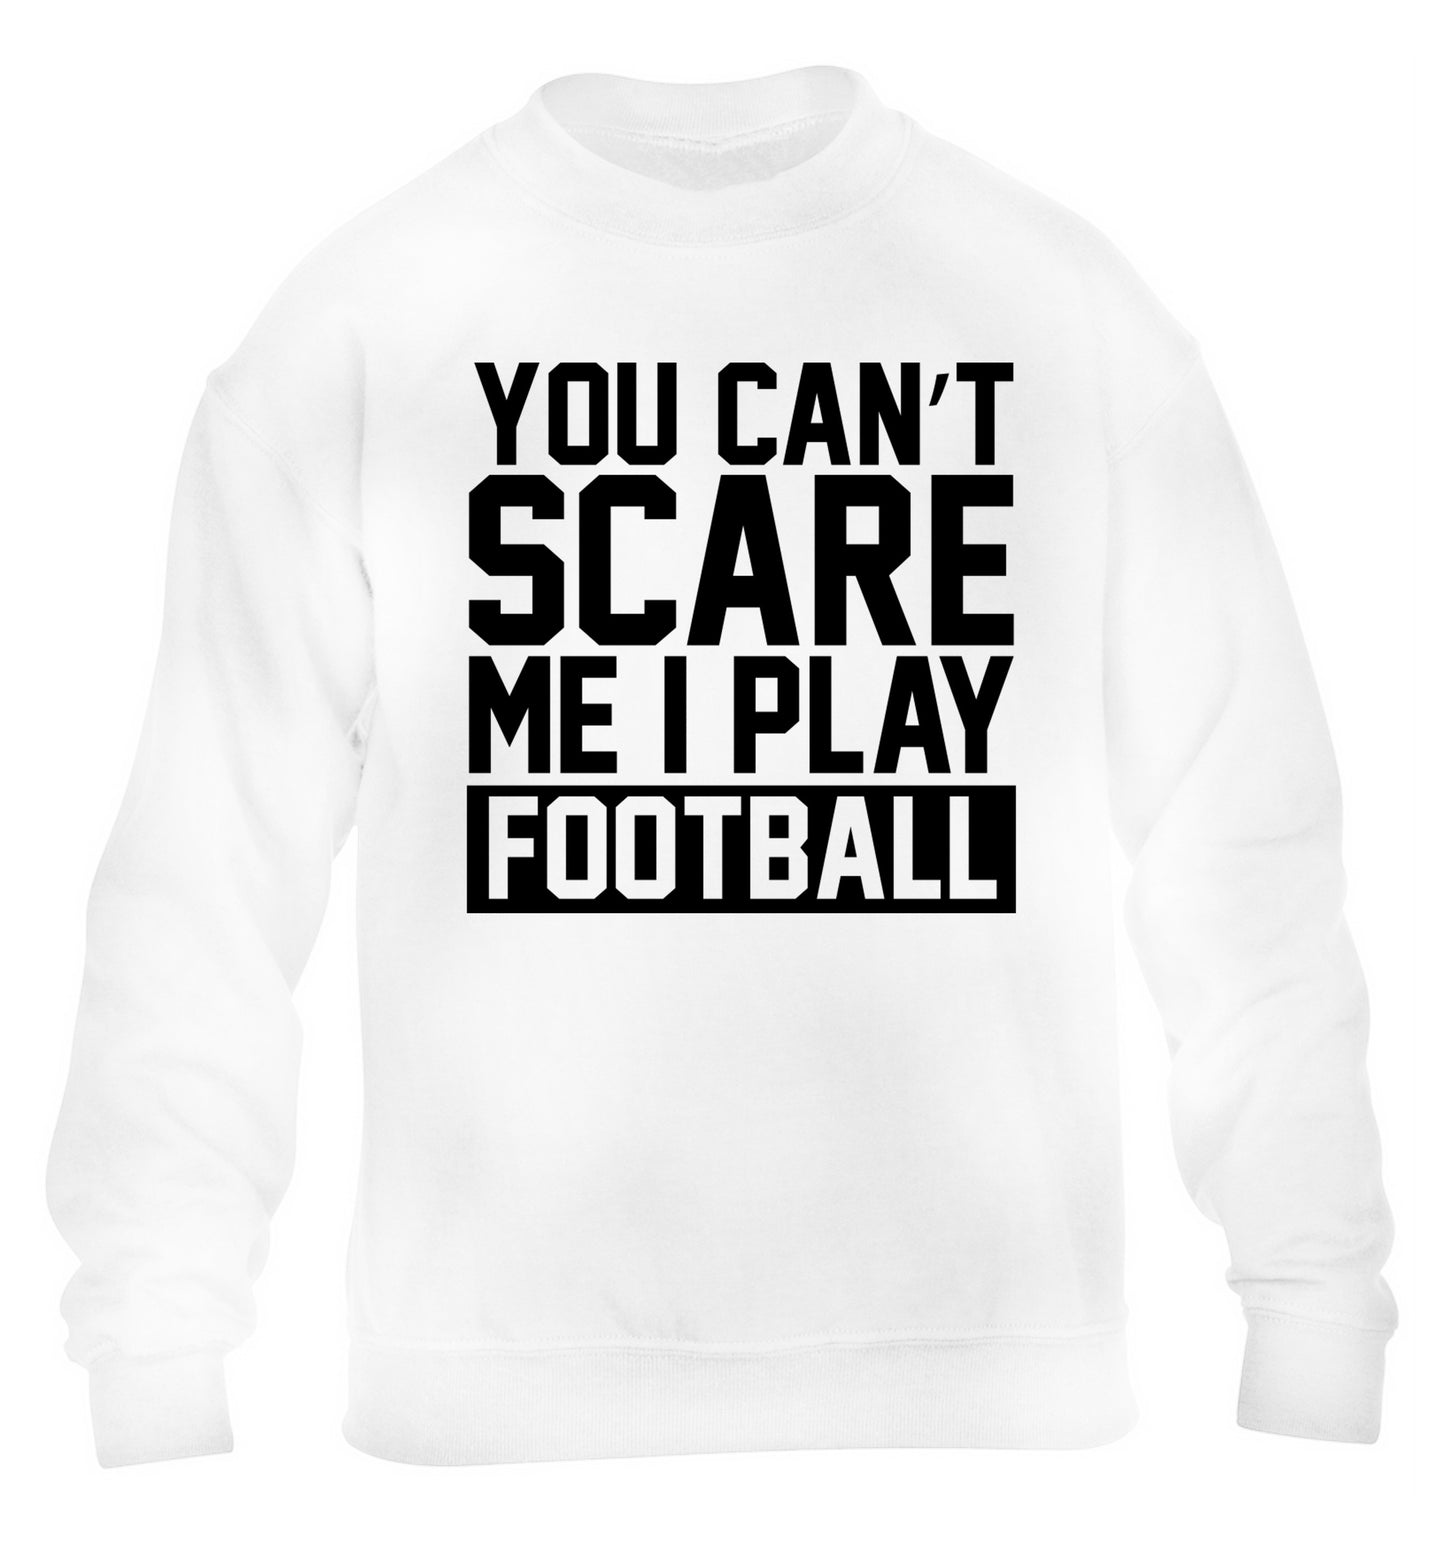 You can't scare me I play football children's white sweater 12-14 Years